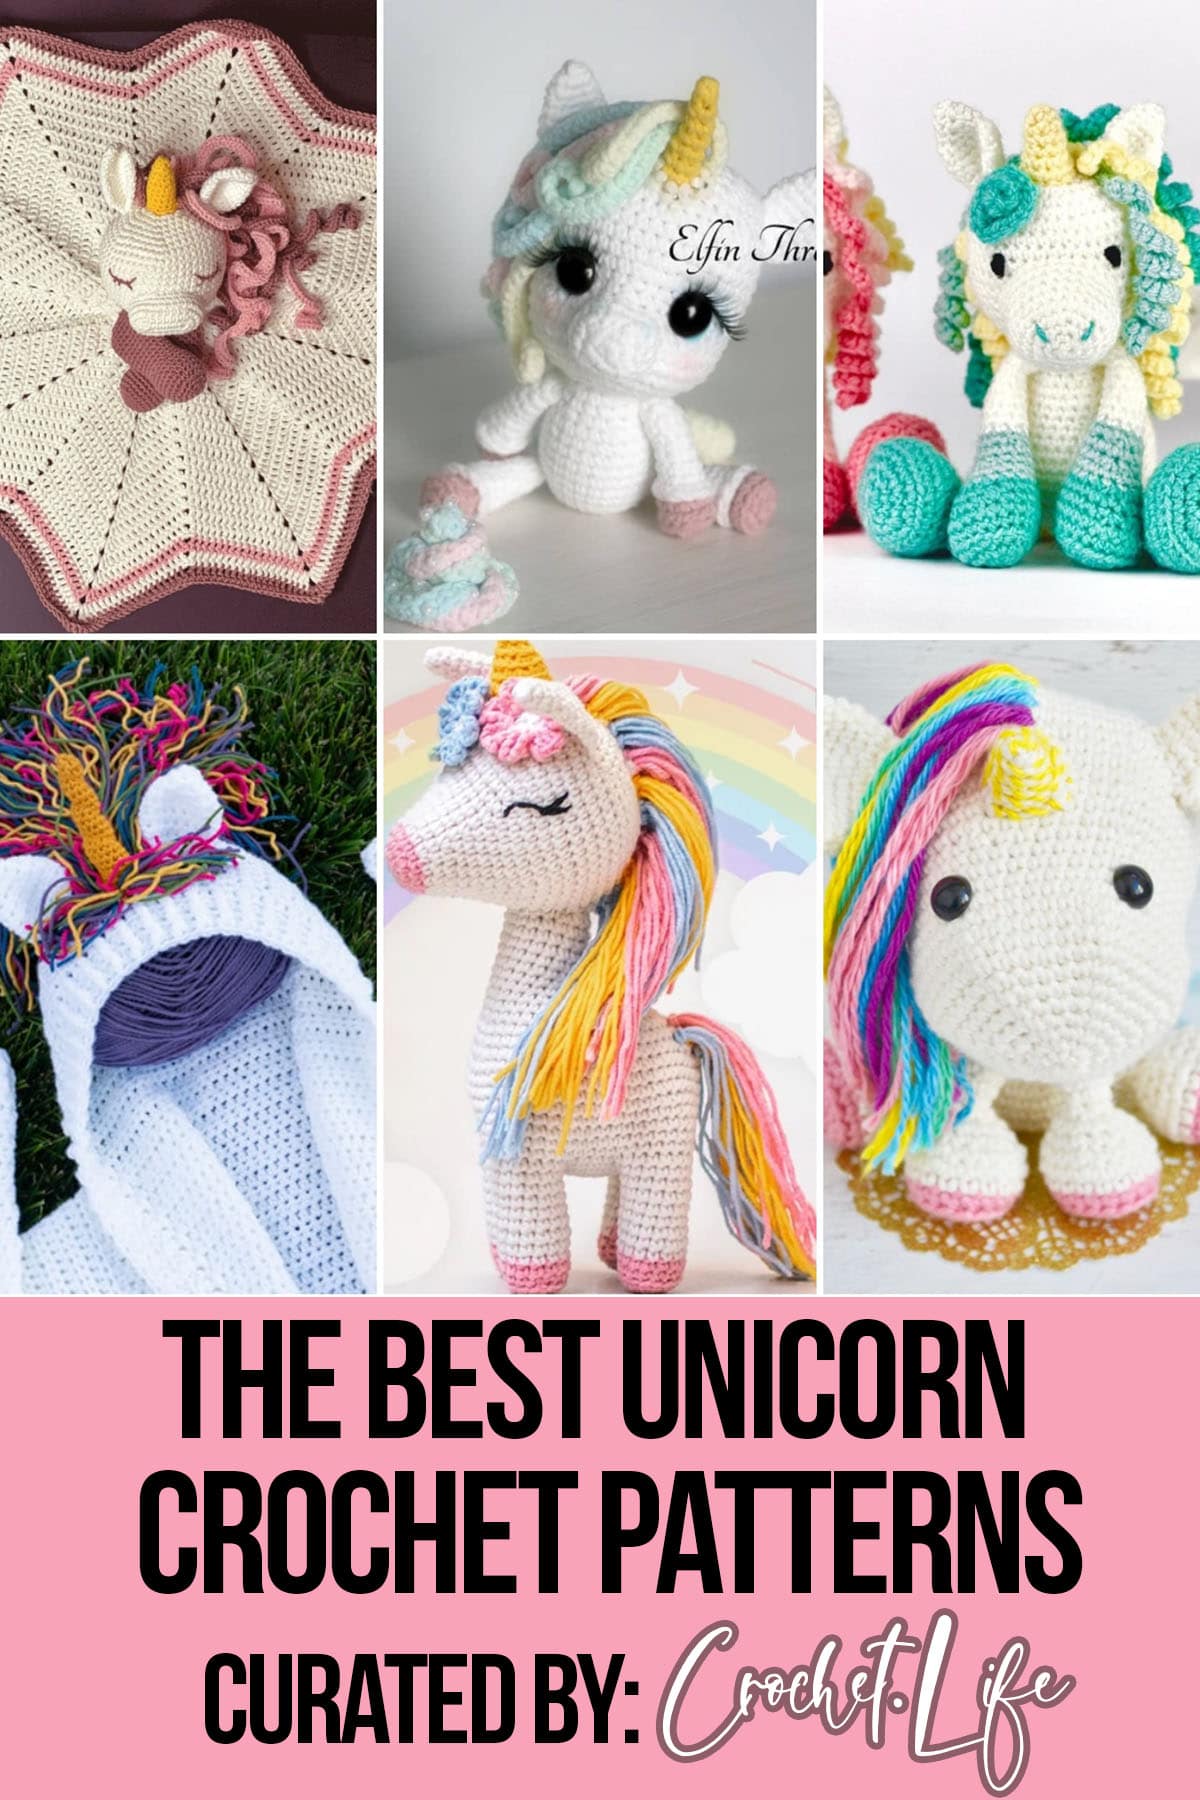 photo collage of crochet patterns of unicorns with text which reads the best unicorn crochet patterns curated by crochet.life